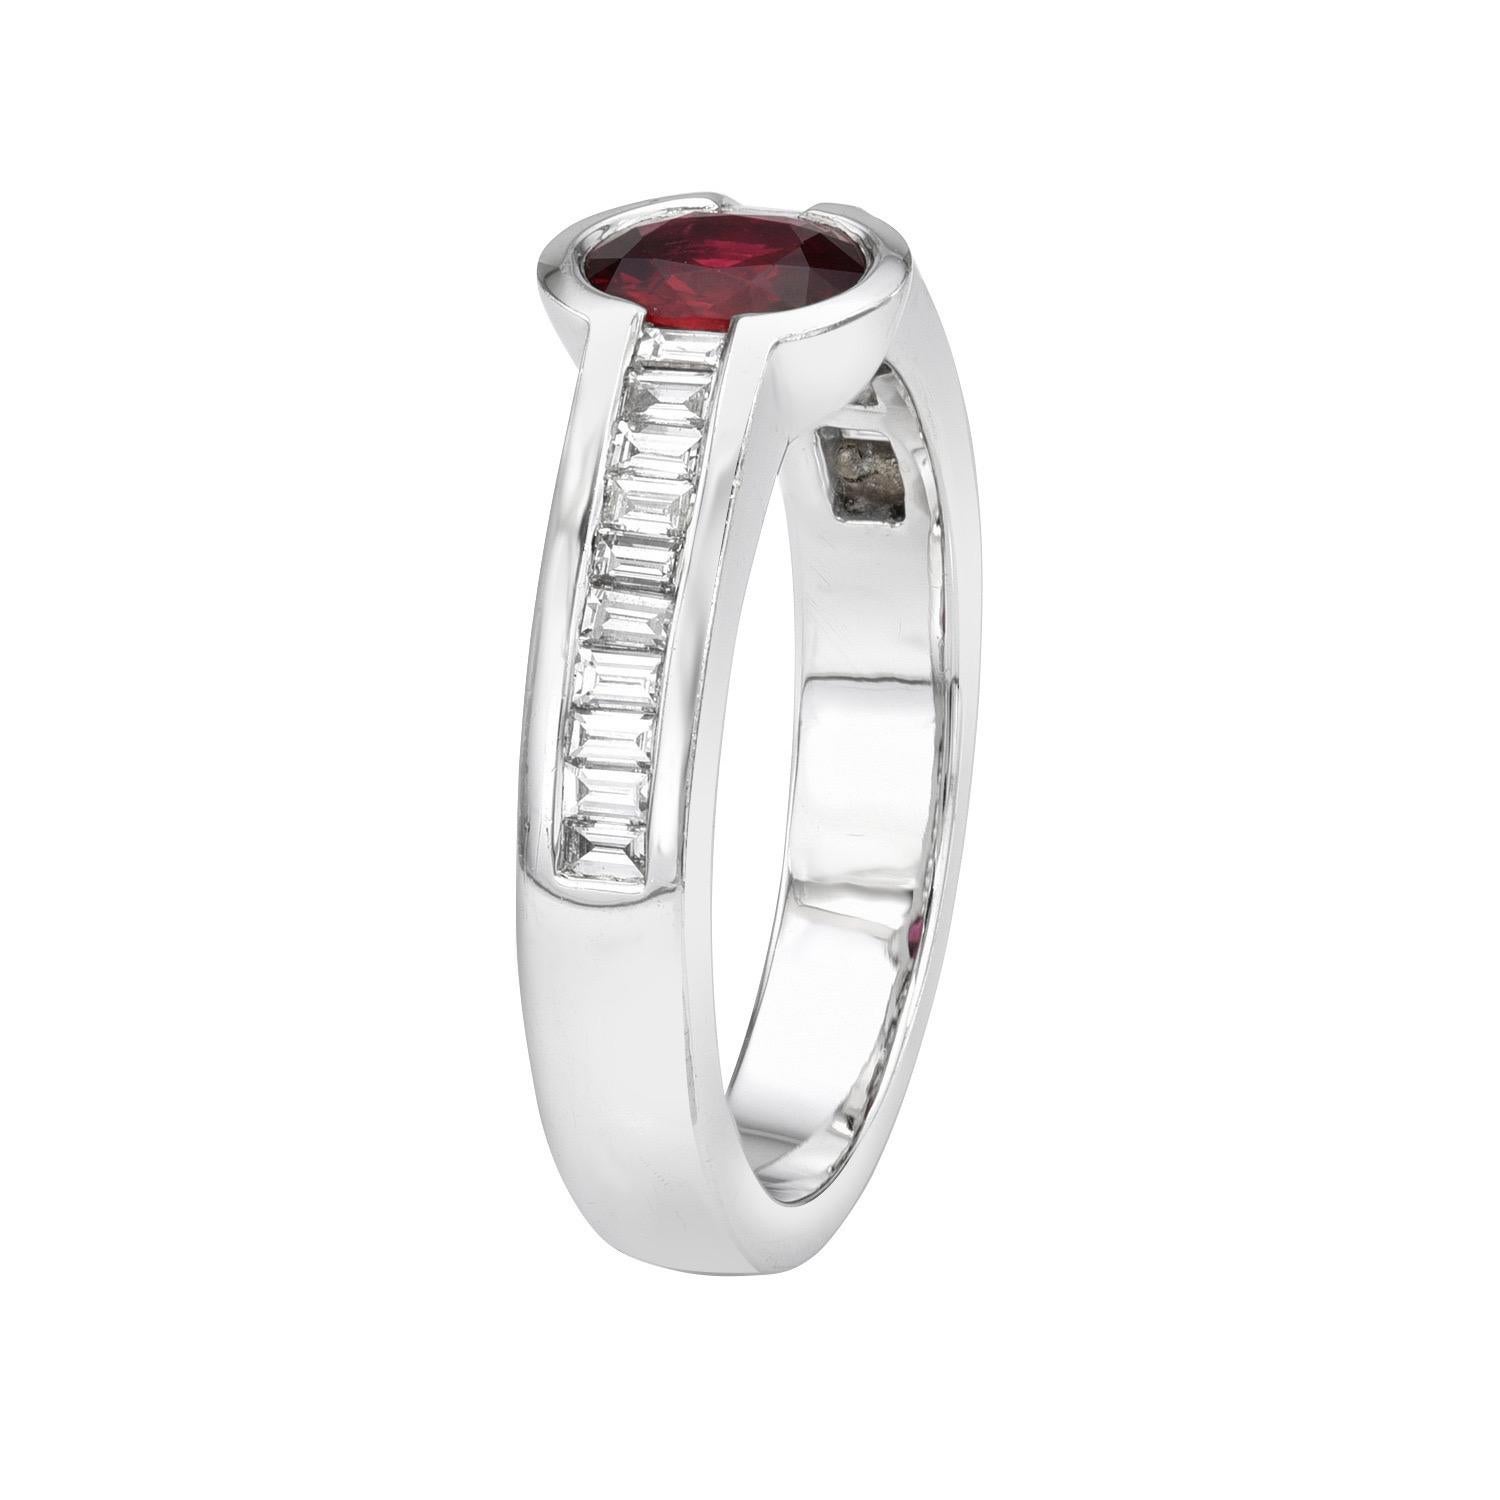 0.67 carat Ruby oval 18K white gold ring, decorated with baguette diamonds totaling 0.34 carats.
Ring size 6.5. Resizing is complementary upon request.
Returns are accepted and paid by us within 7 days of delivery.